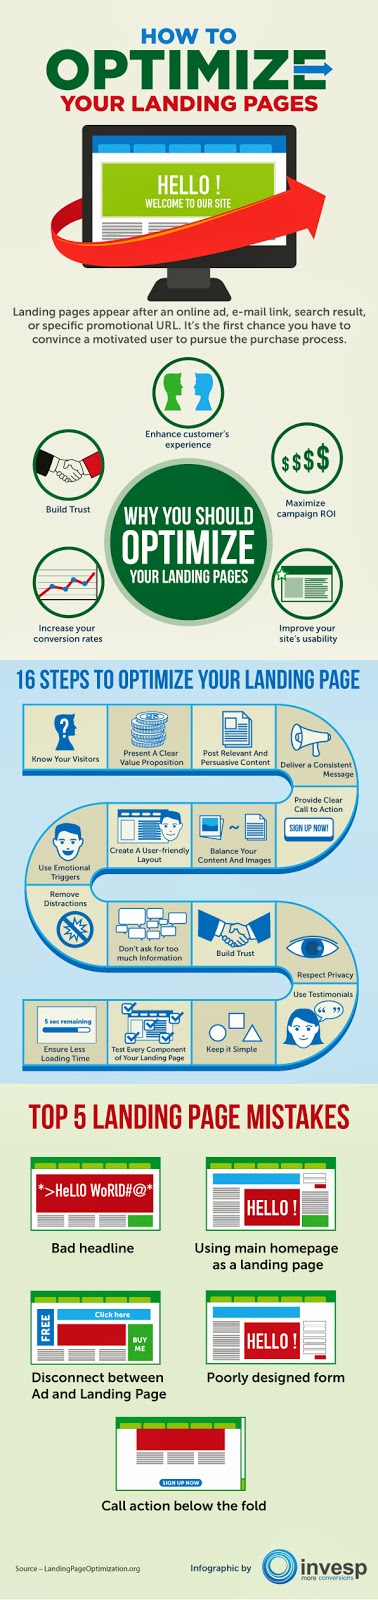 How to optimize you landing pages infographic